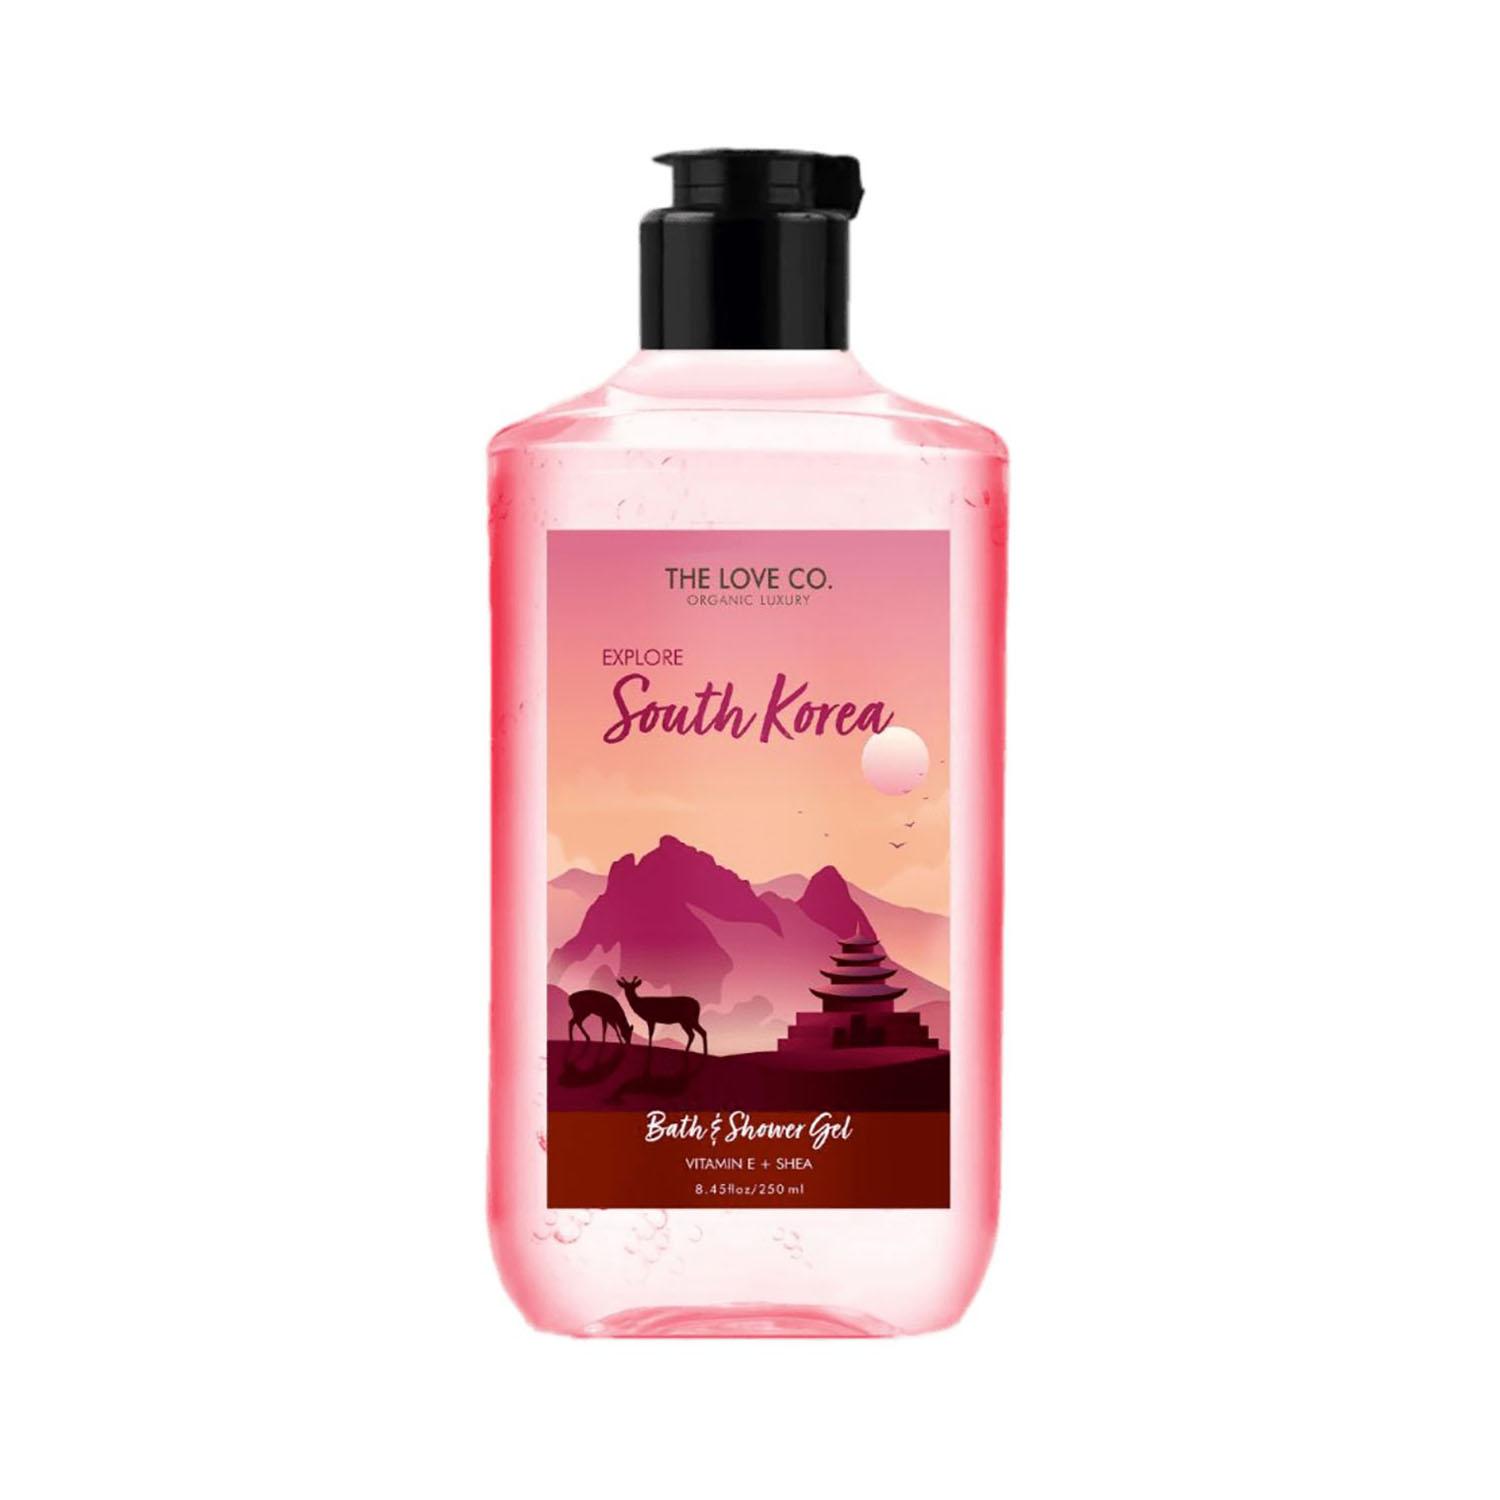 THE LOVE CO. | THE LOVE CO. South Korea Body and Shower Gel (250ml)